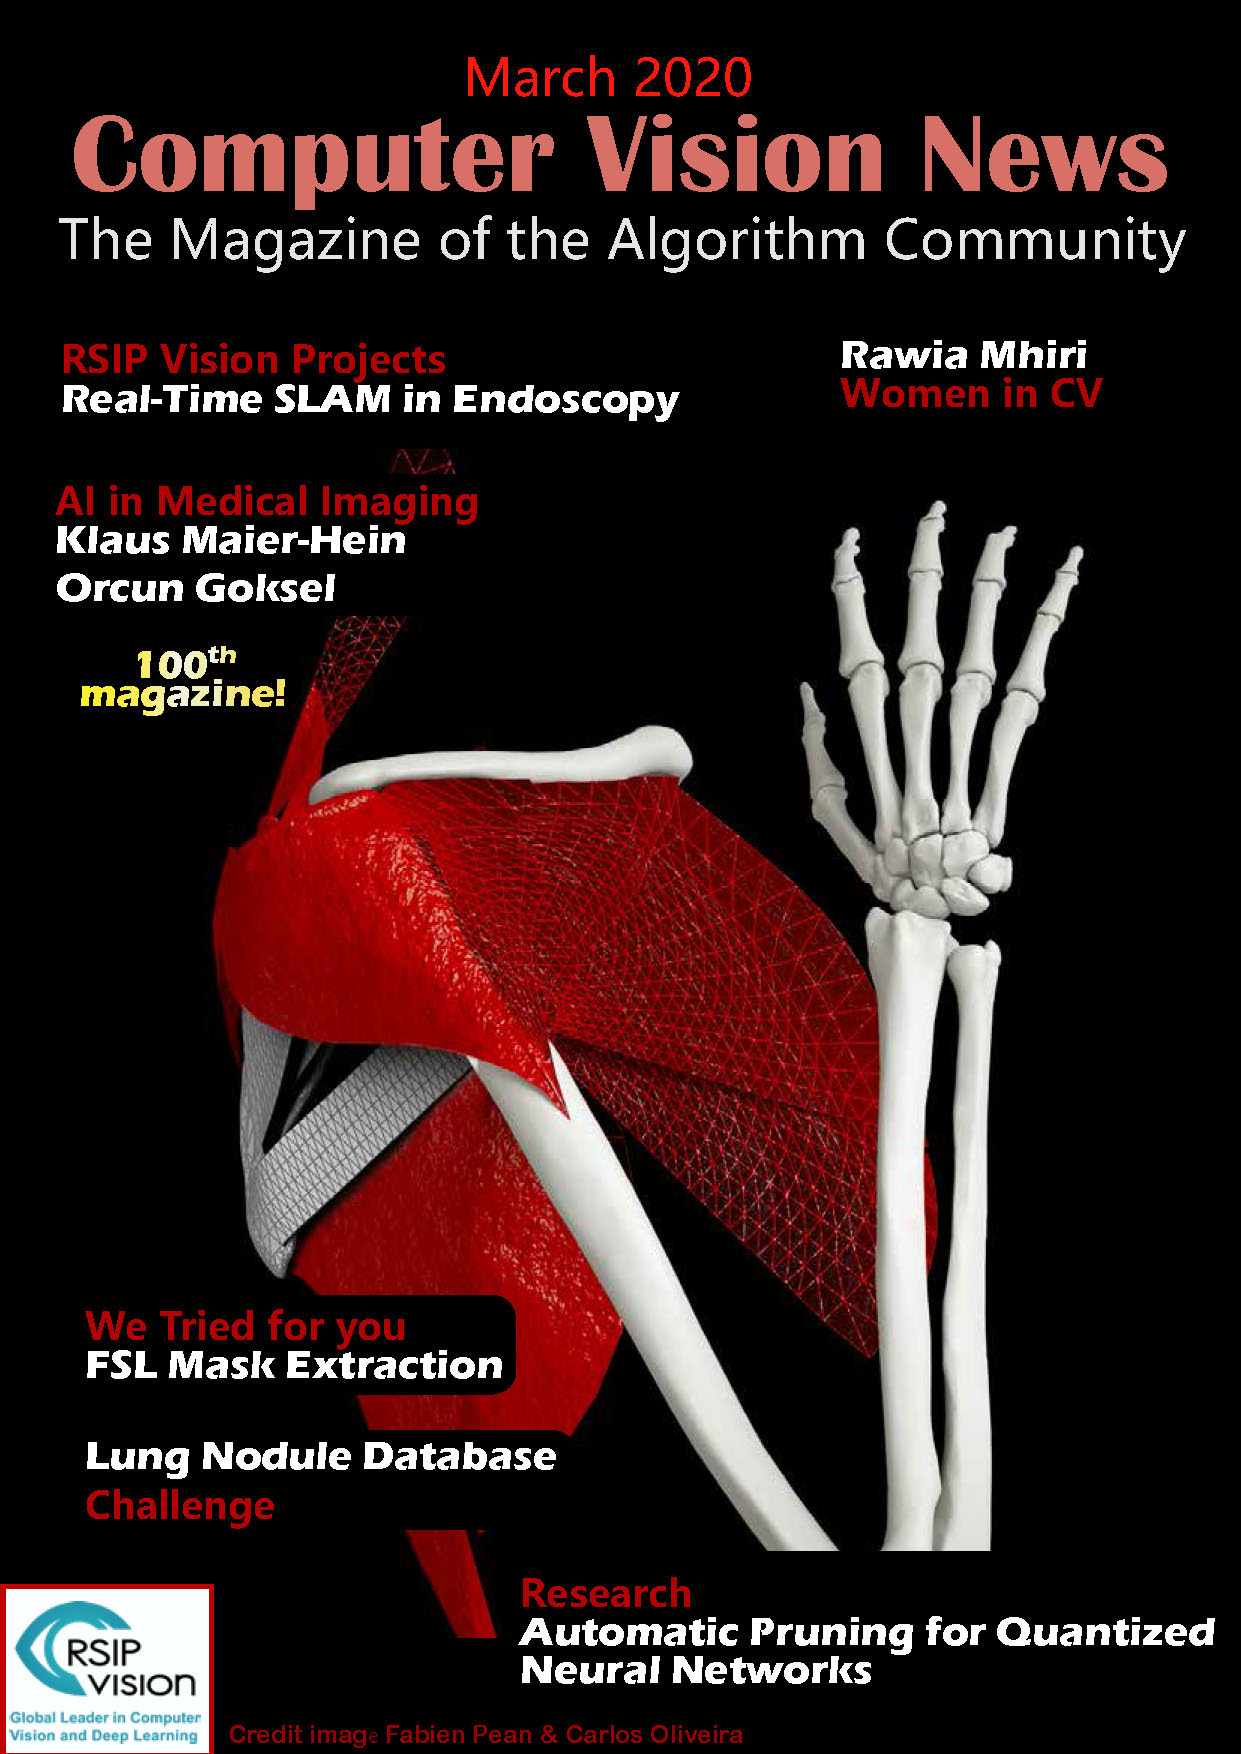 Cover page of Computer Vision News, March issue